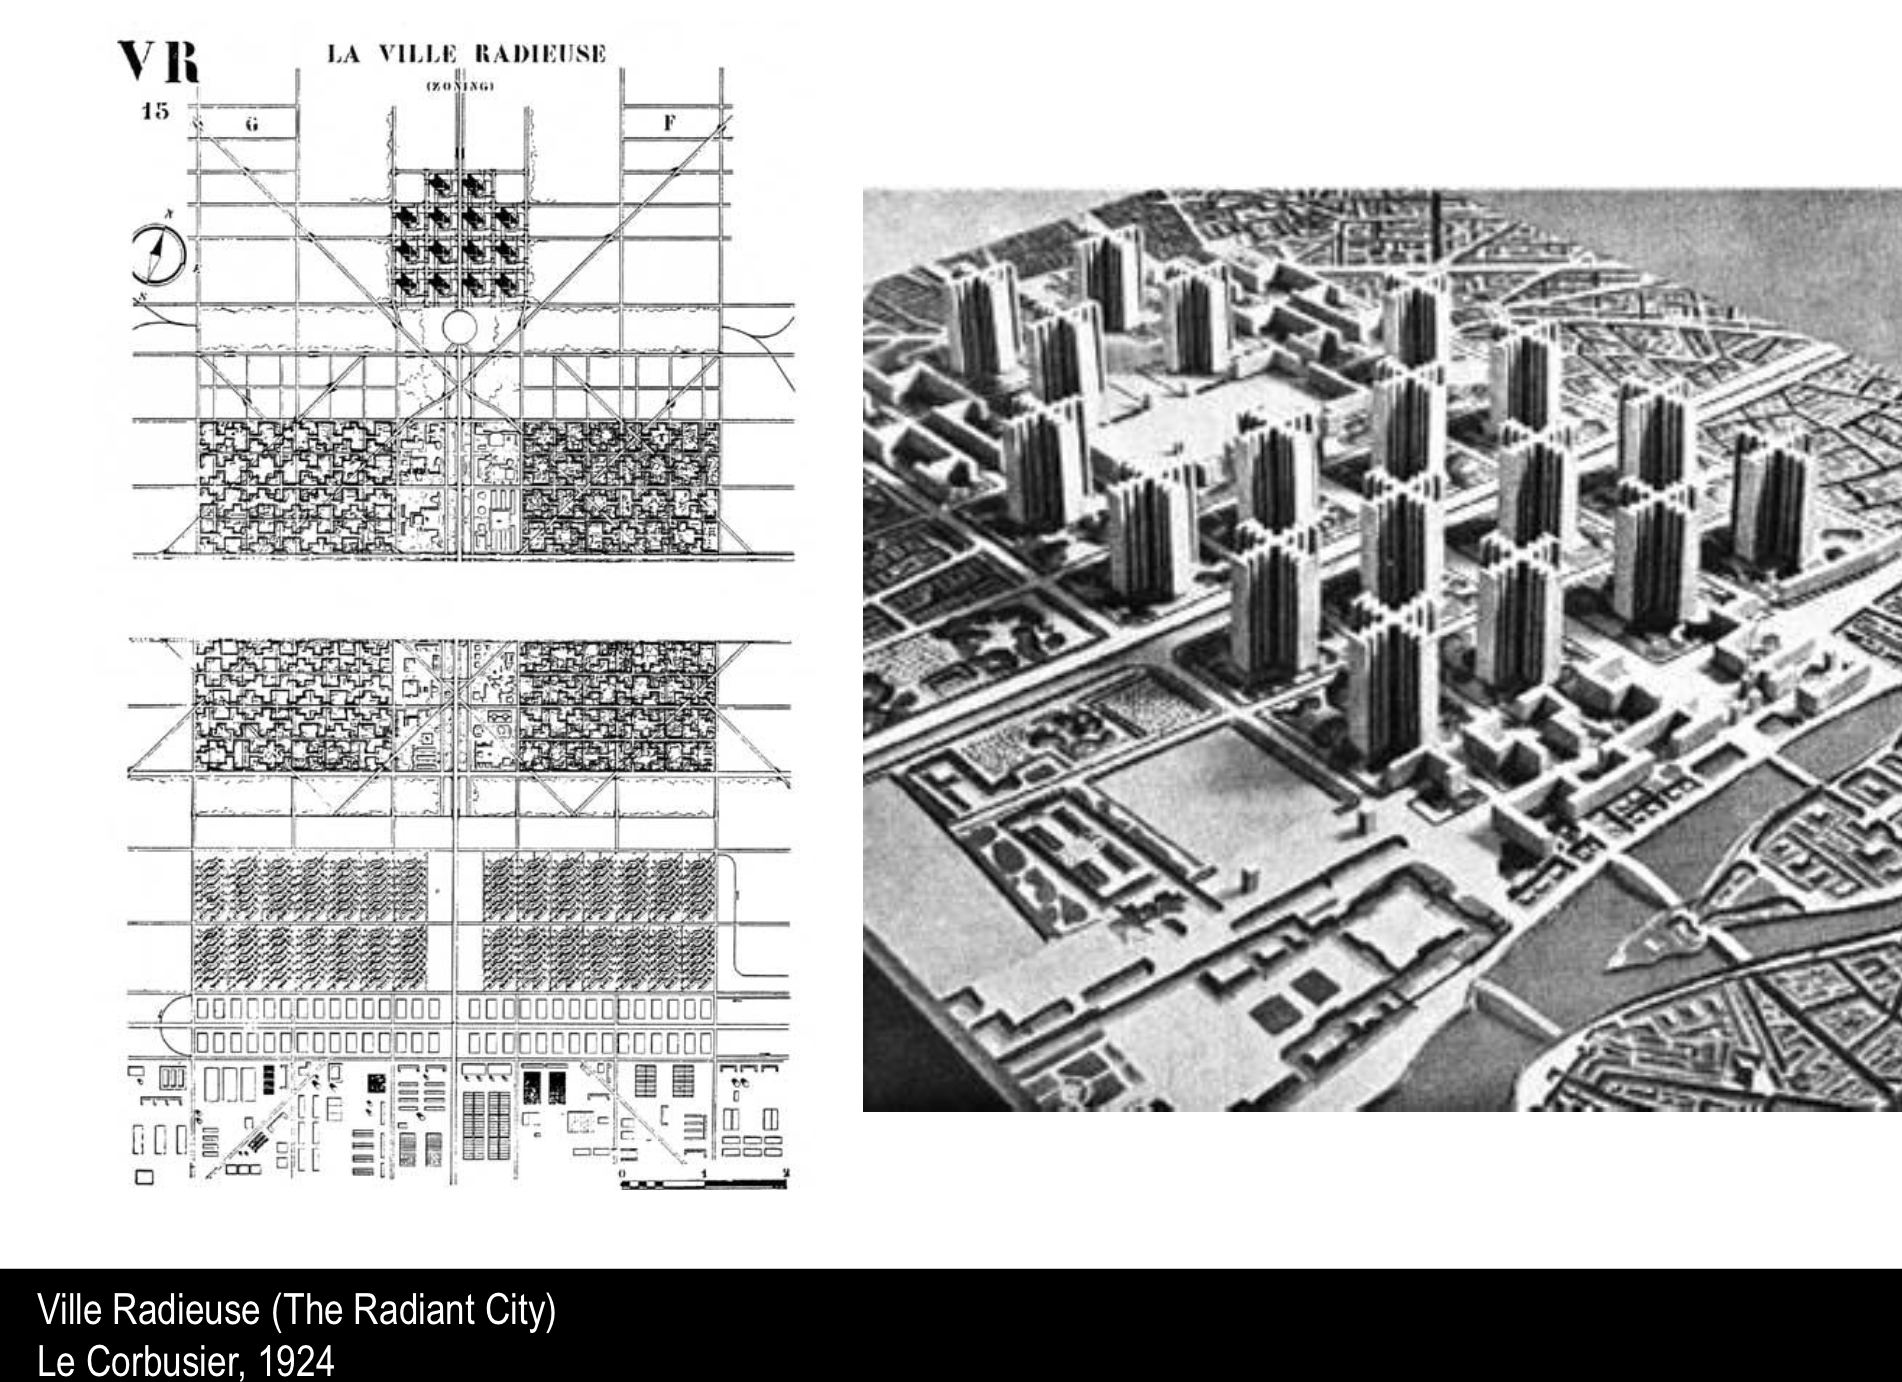 Ville Radieuse: Why did Le Corbusier’s Radiant City fail?